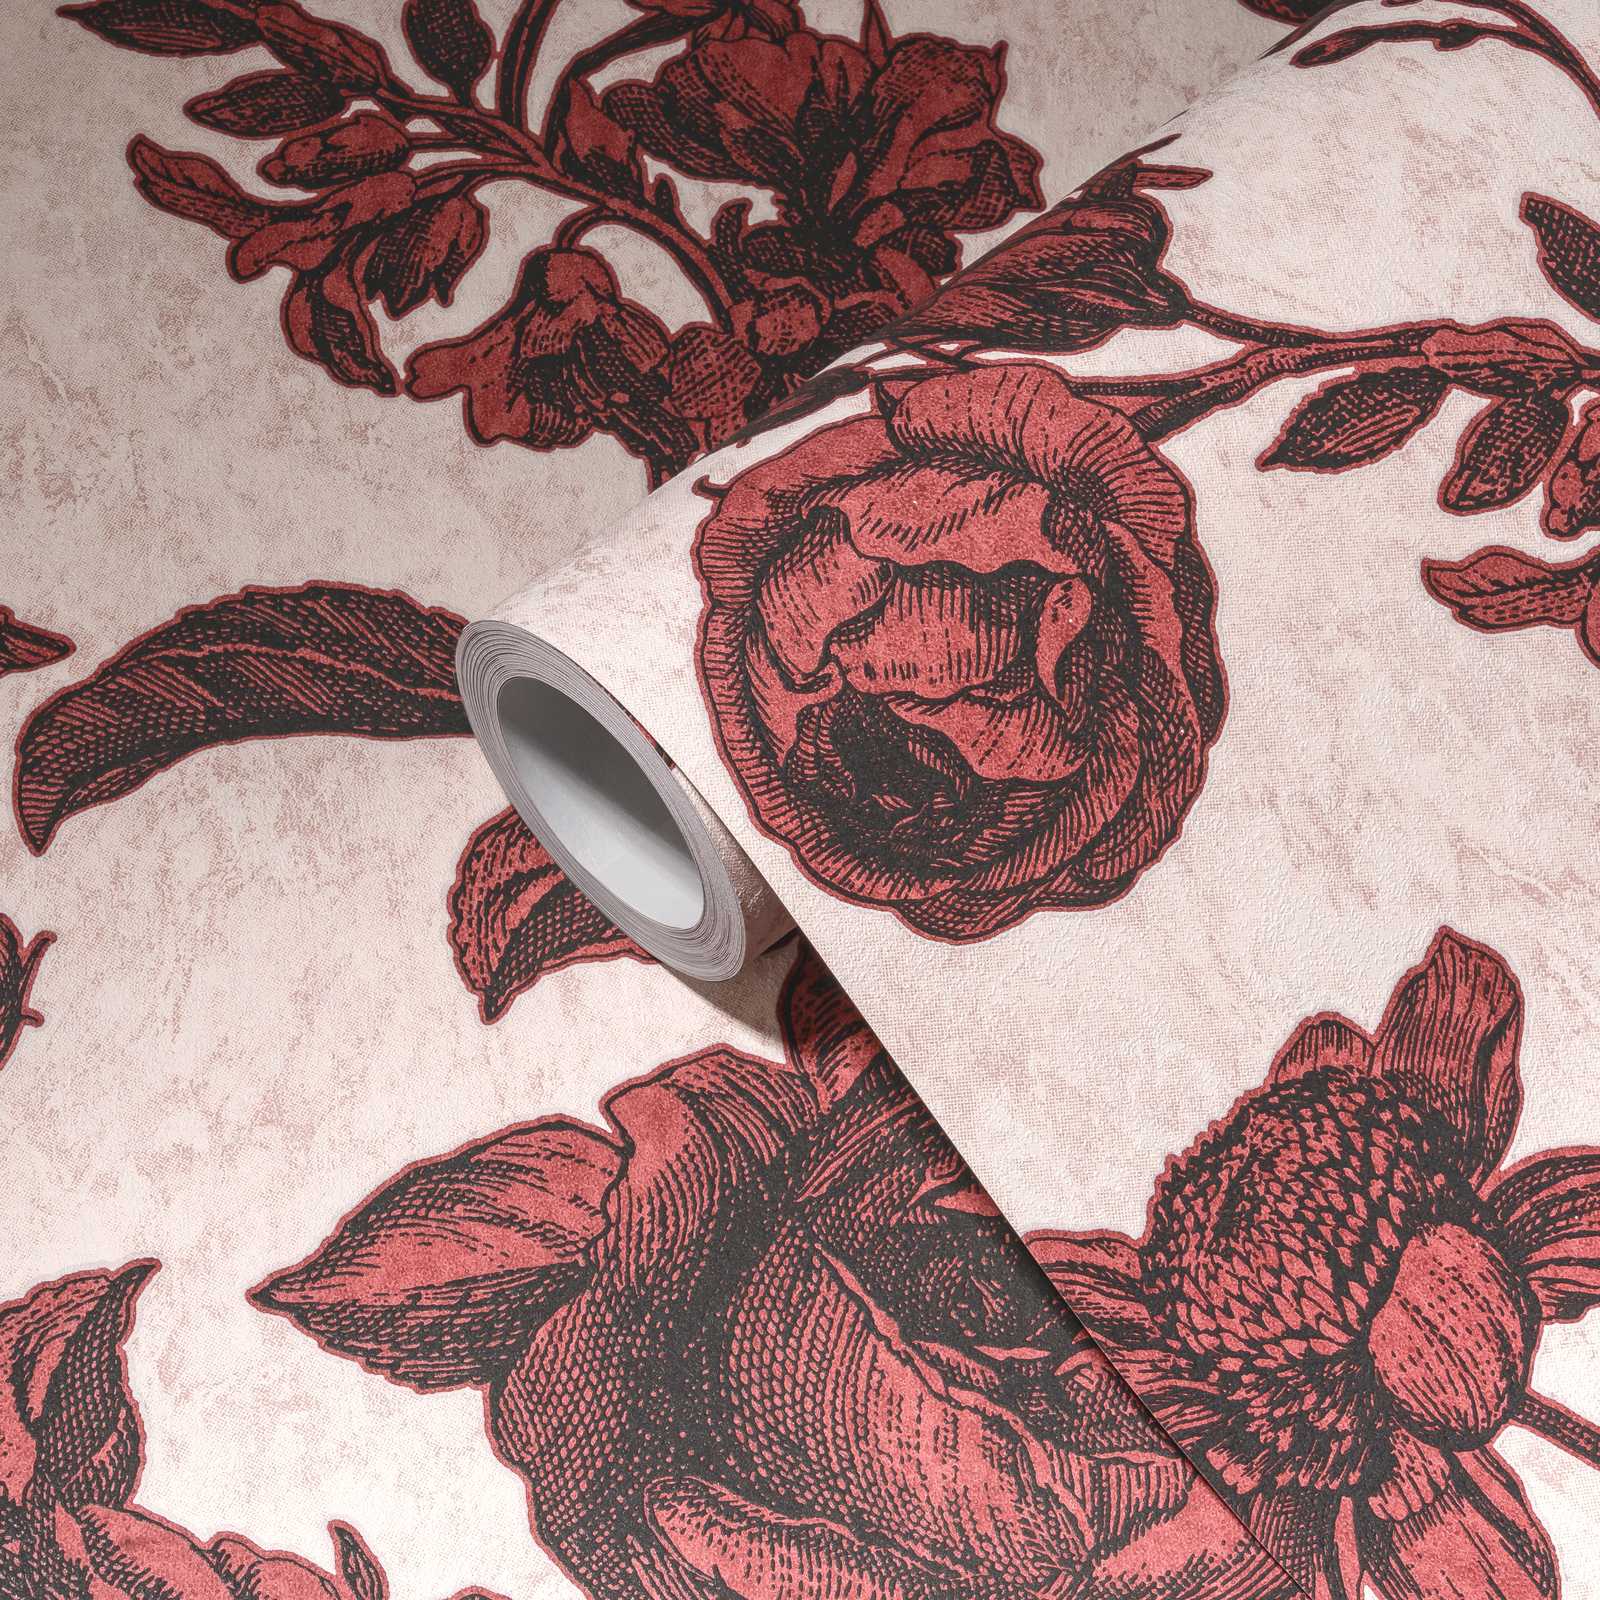             Roses wallpaper red-black in vintage sign style - pink, red
        